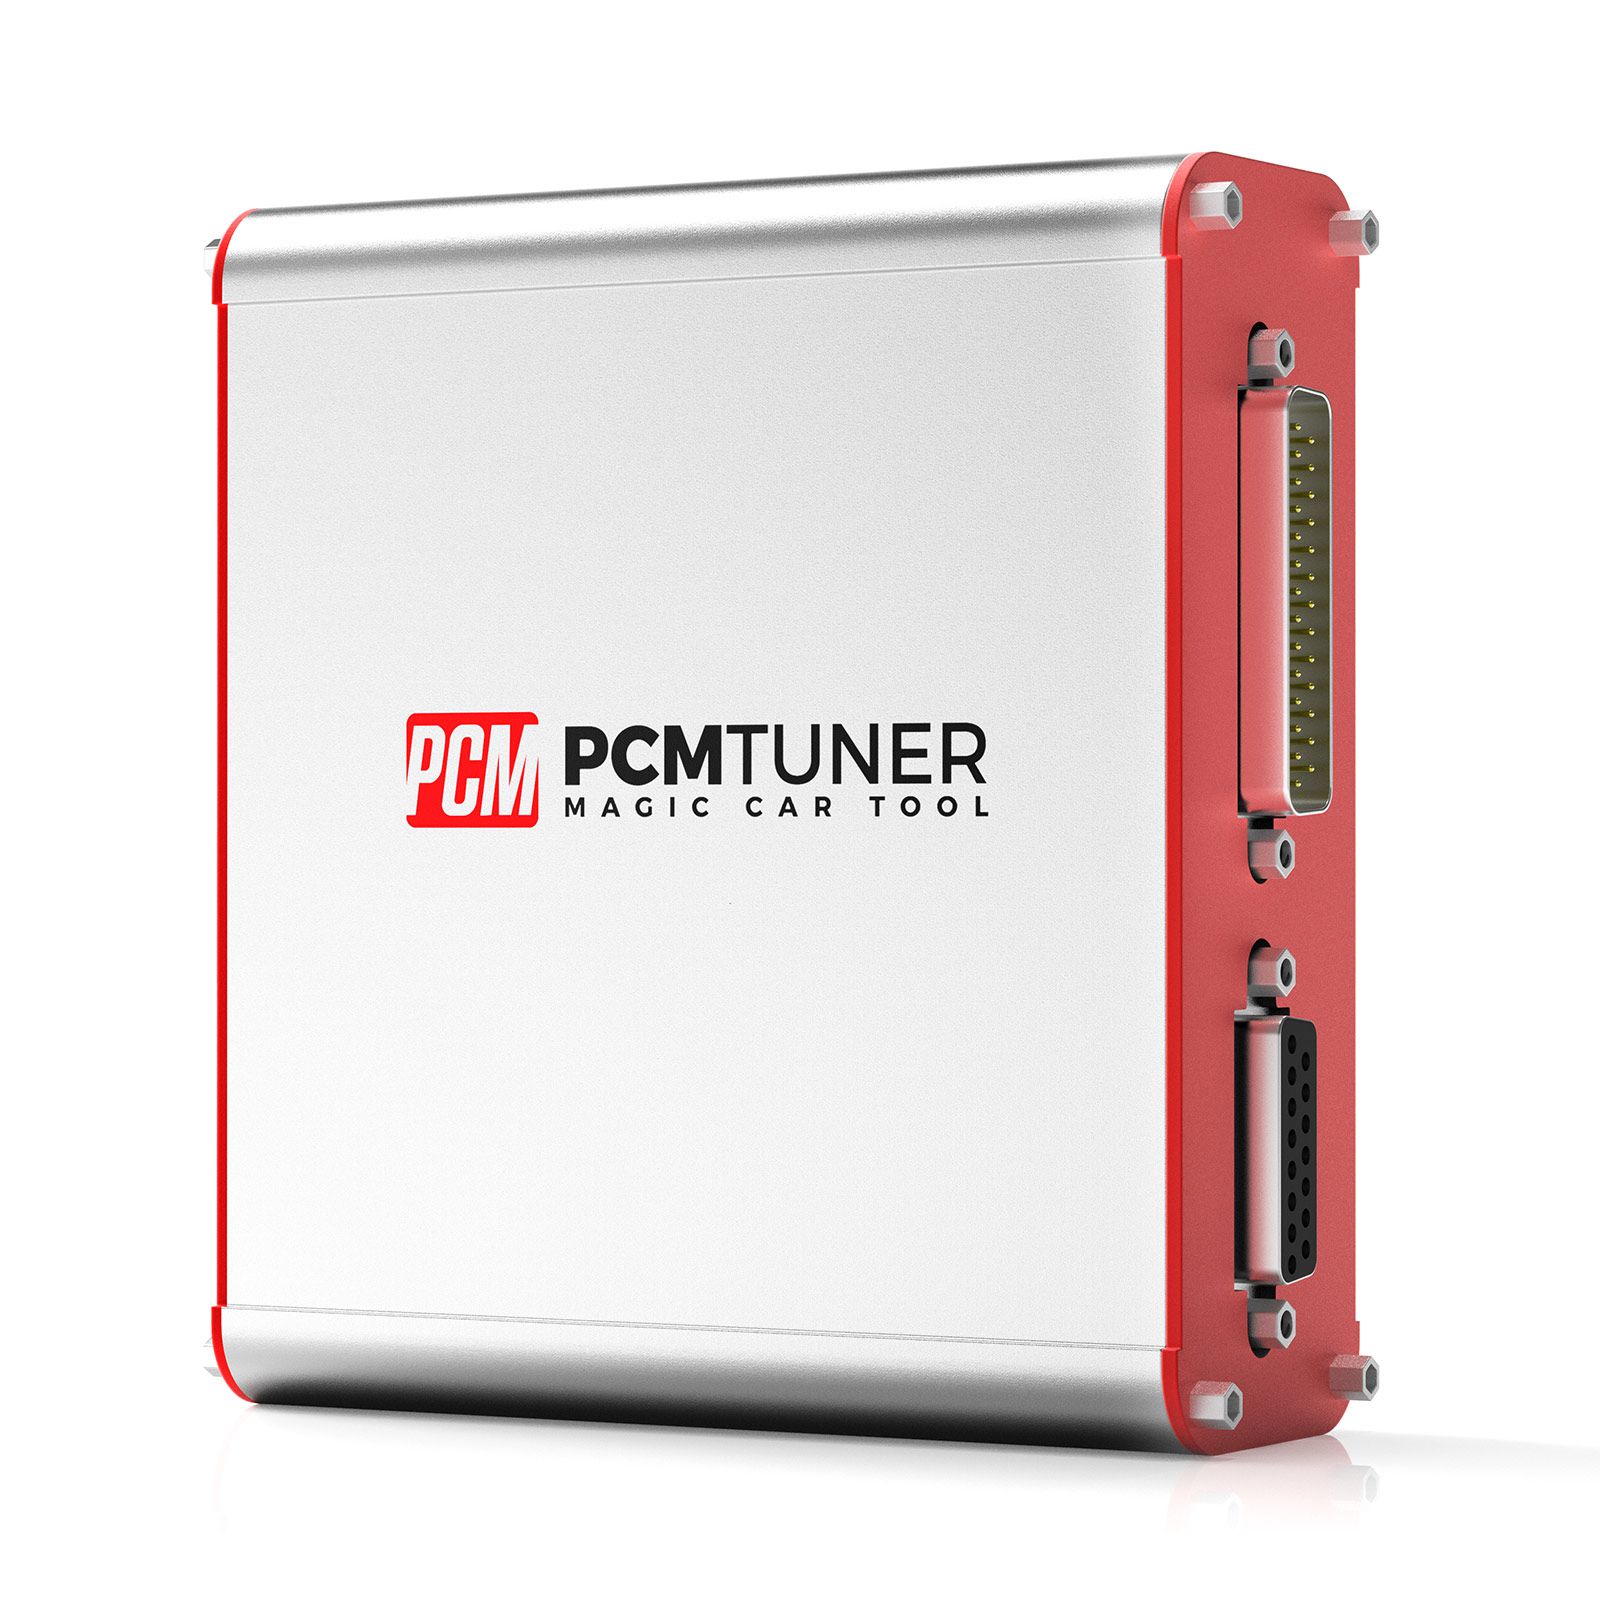 2022 Newest V1.25 PCMtuner ECU Programmer with 67 Modules Online Update Support Checksum and Pinout Diagram with Free Damaos for Users